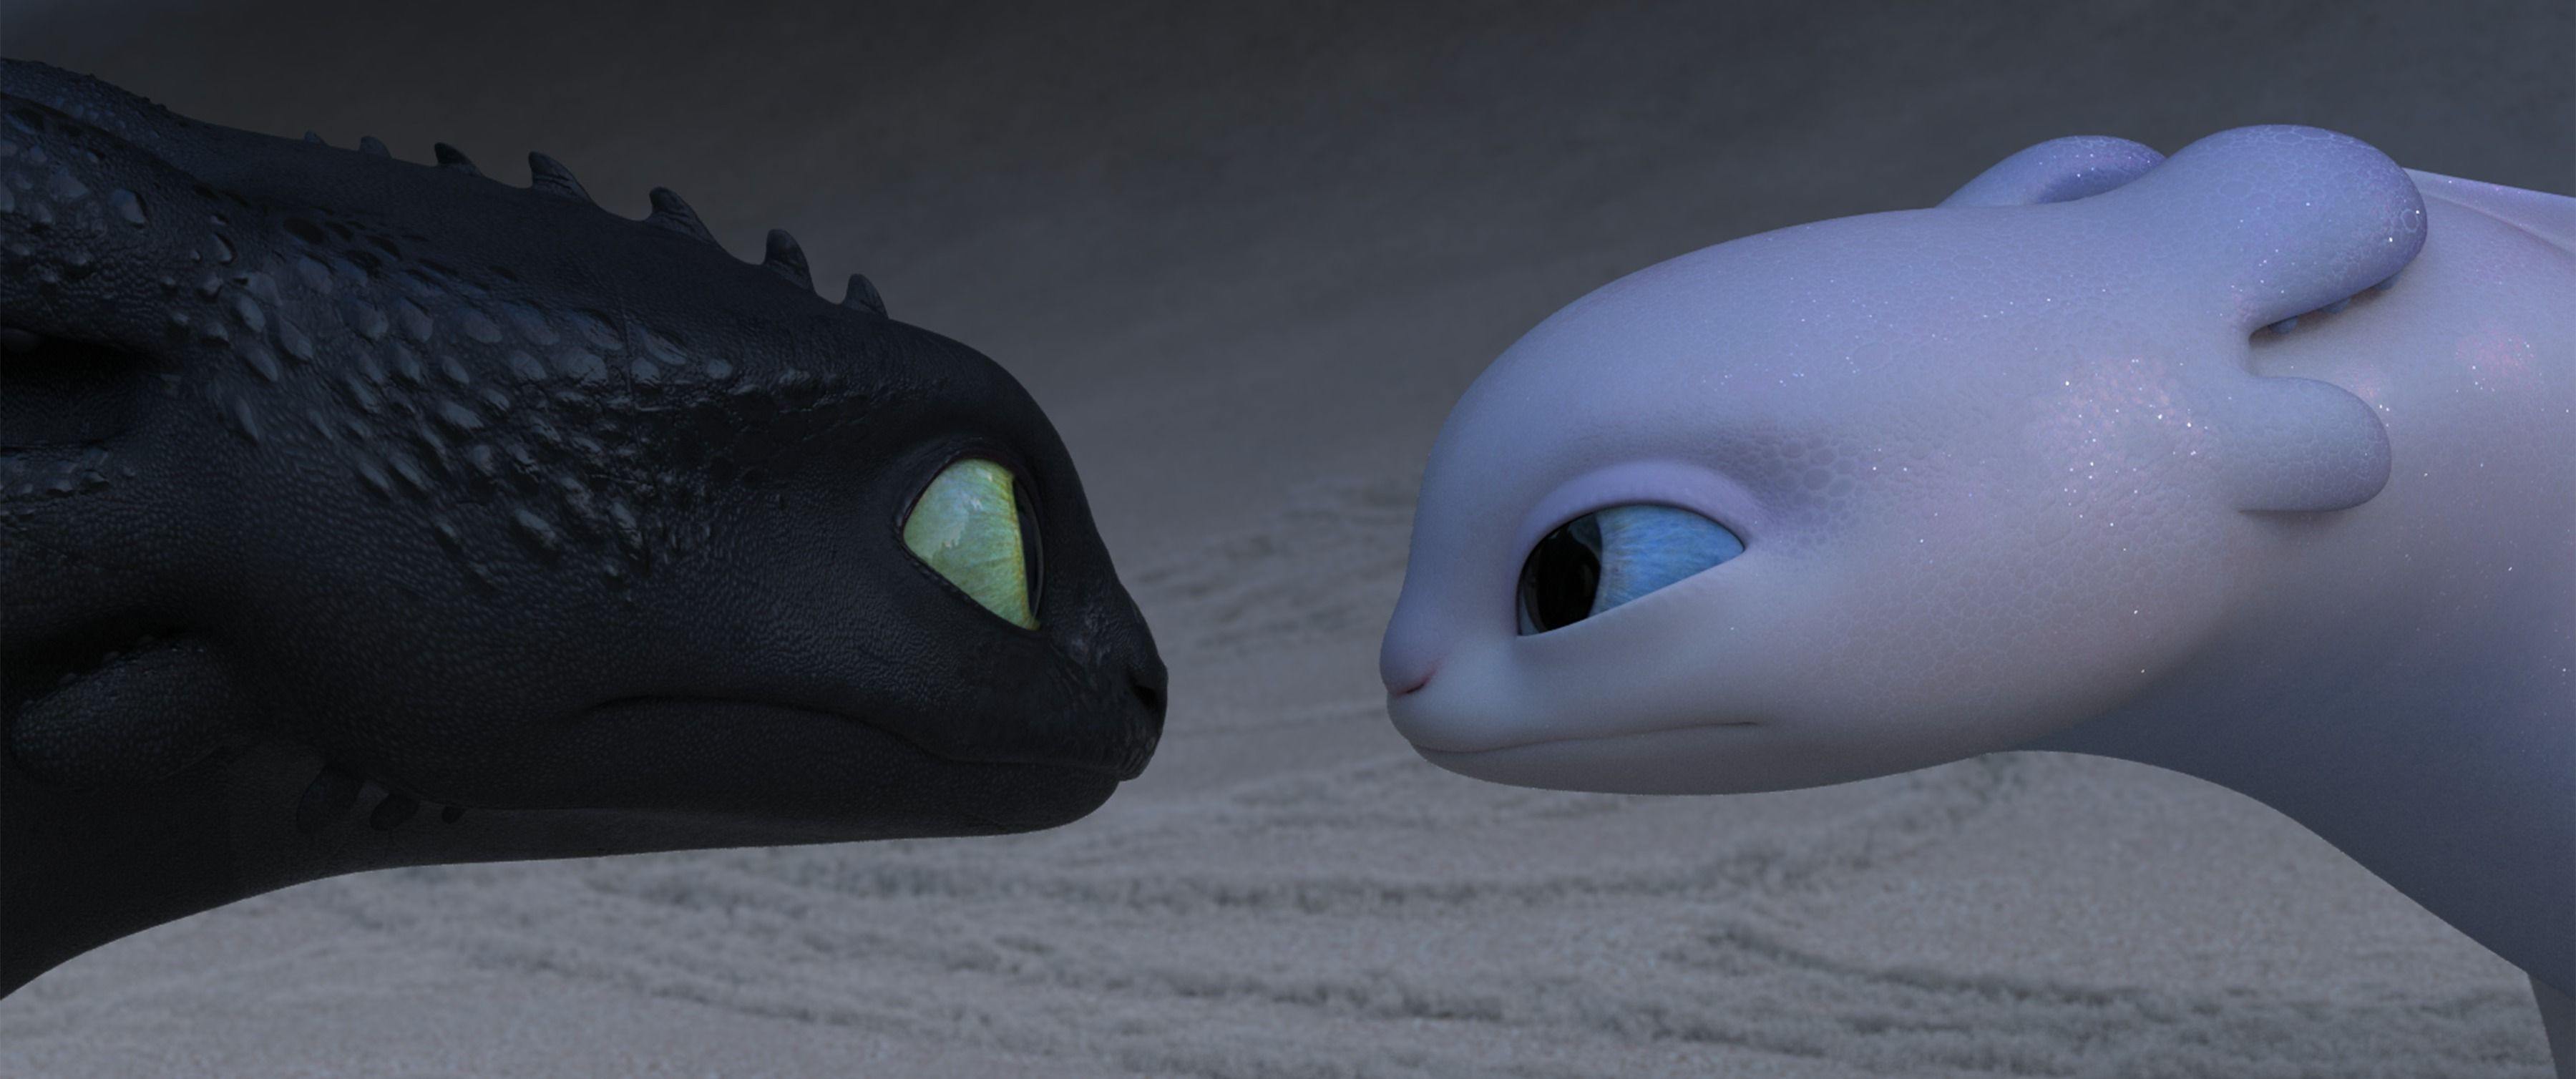 how to train your dragon 3 the hidden world 1